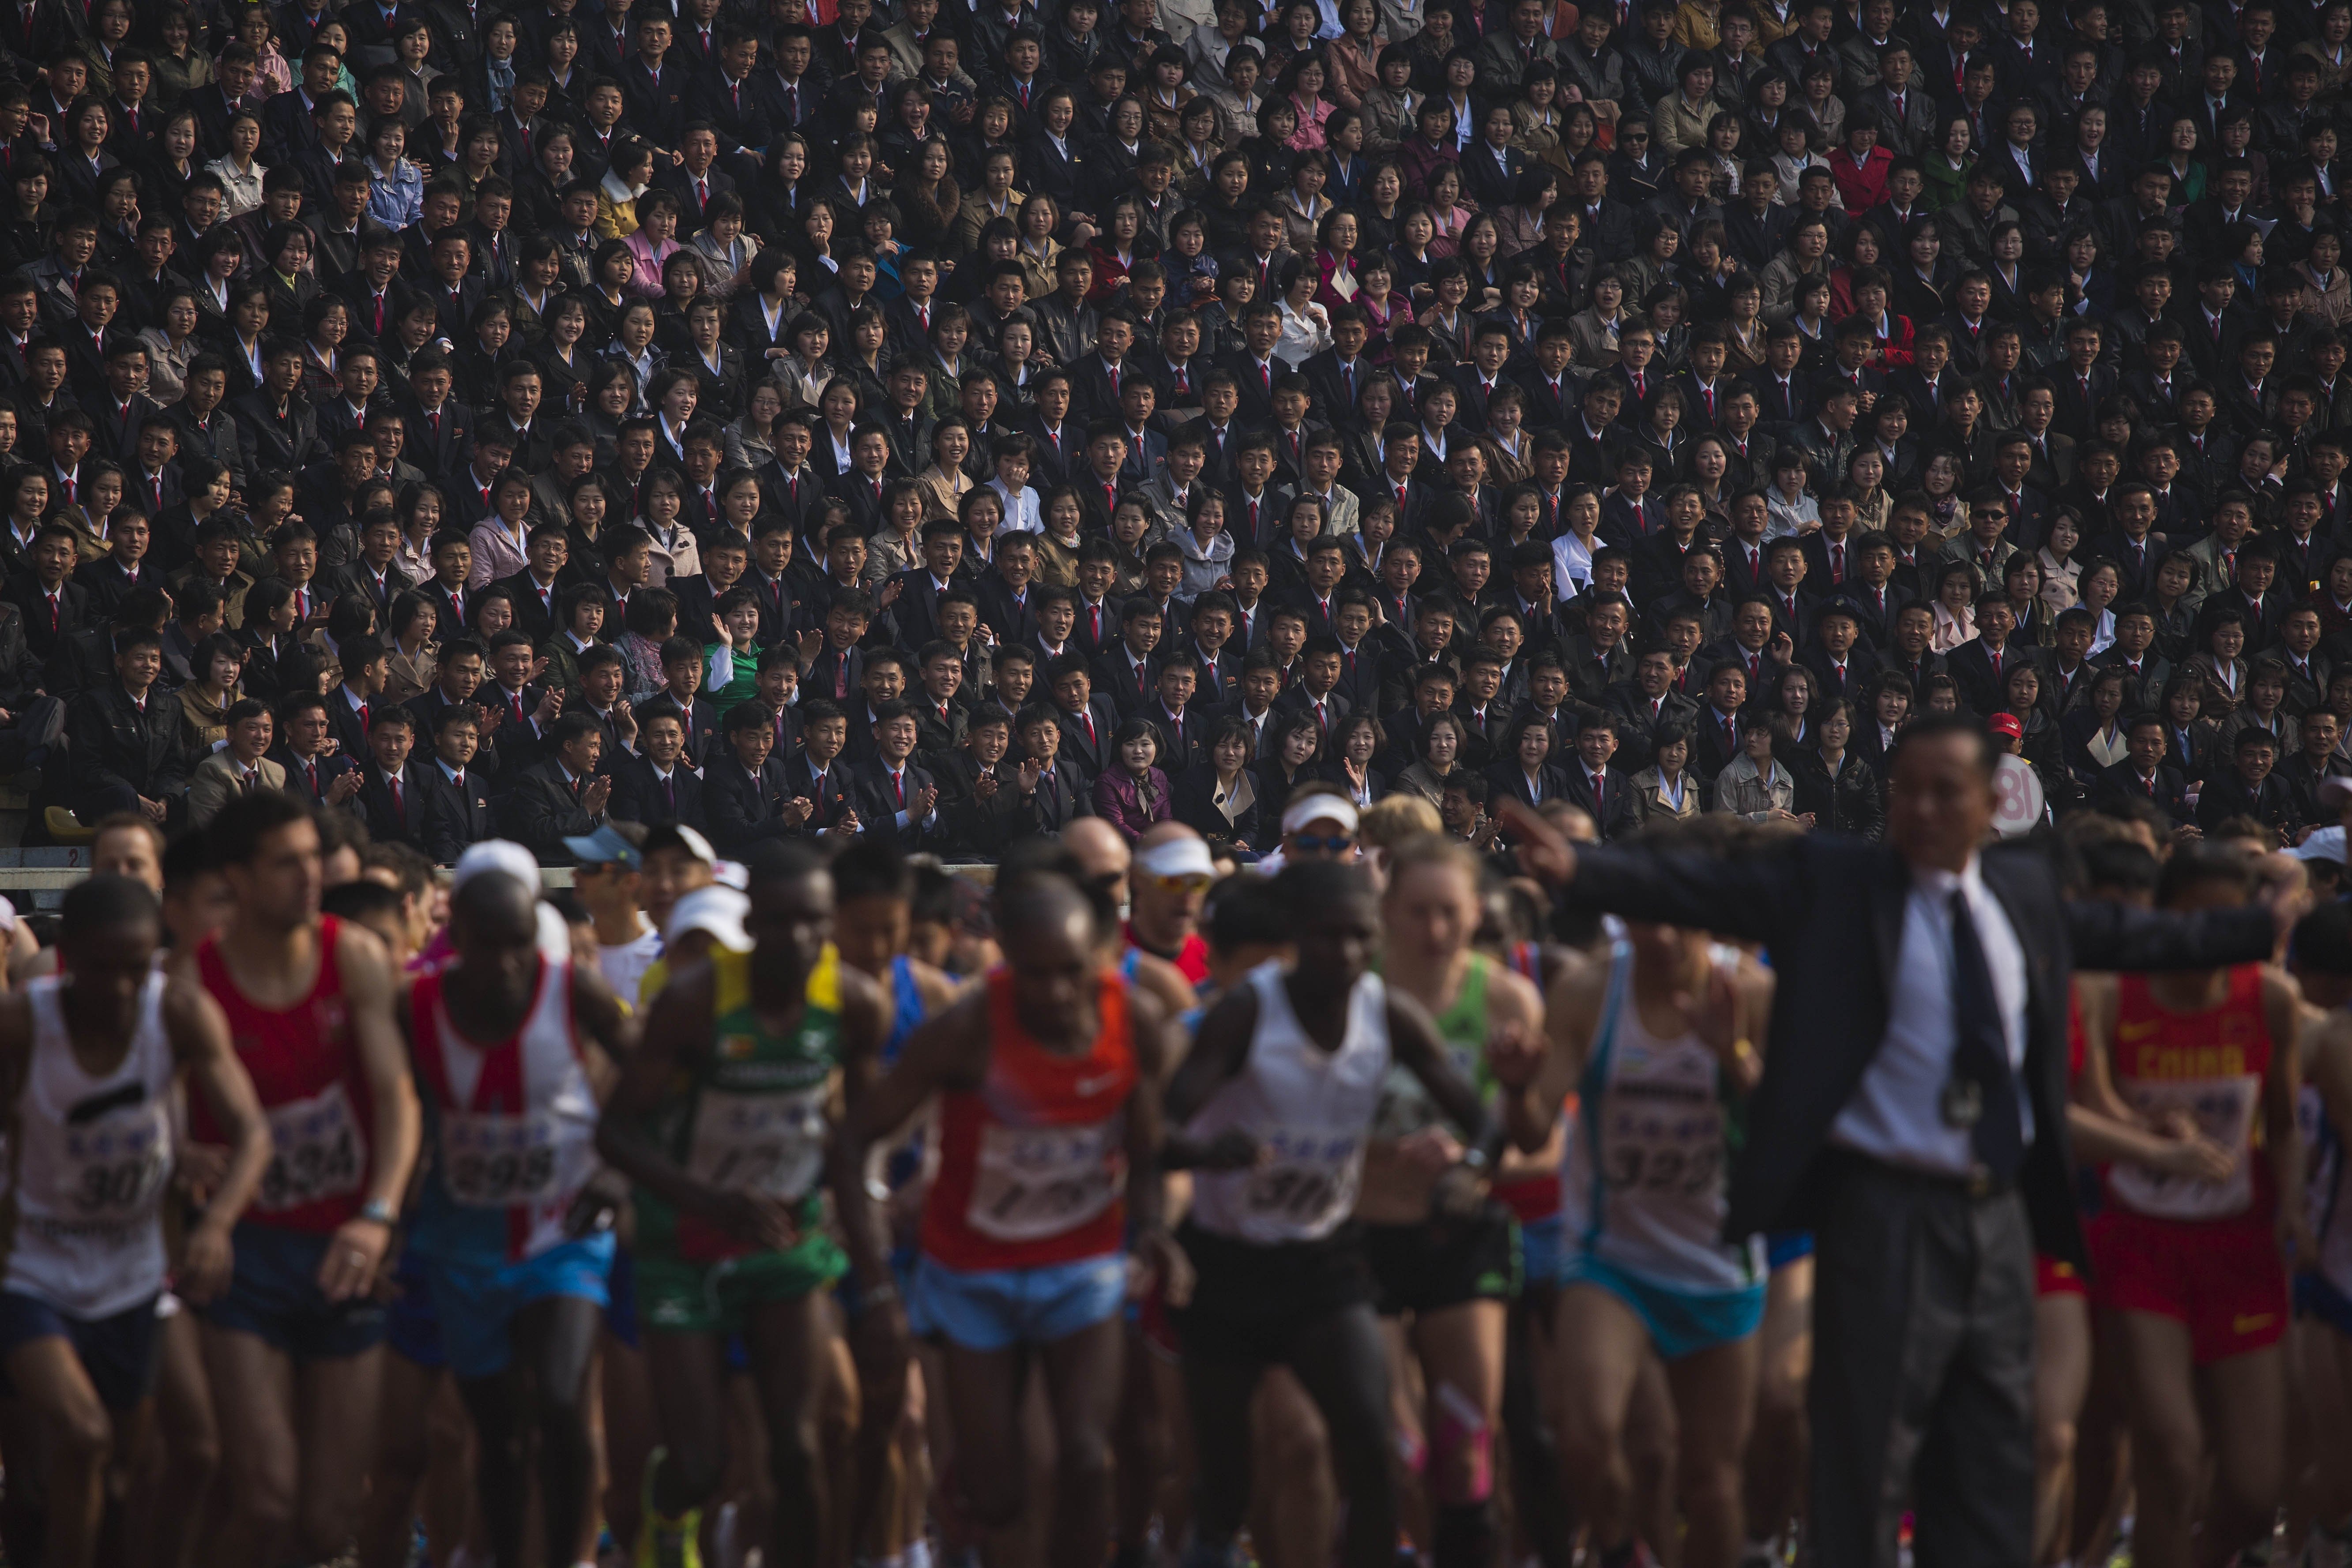 Apr. 13, 2014. North Korean spectators watch from the stands of Kim Il Sung Stadium as runners line up a the start of the Mangyongdae Prize International Marathon in Pyongyang, North Korea. The annual race was open to foreign tourists for the first time this year.